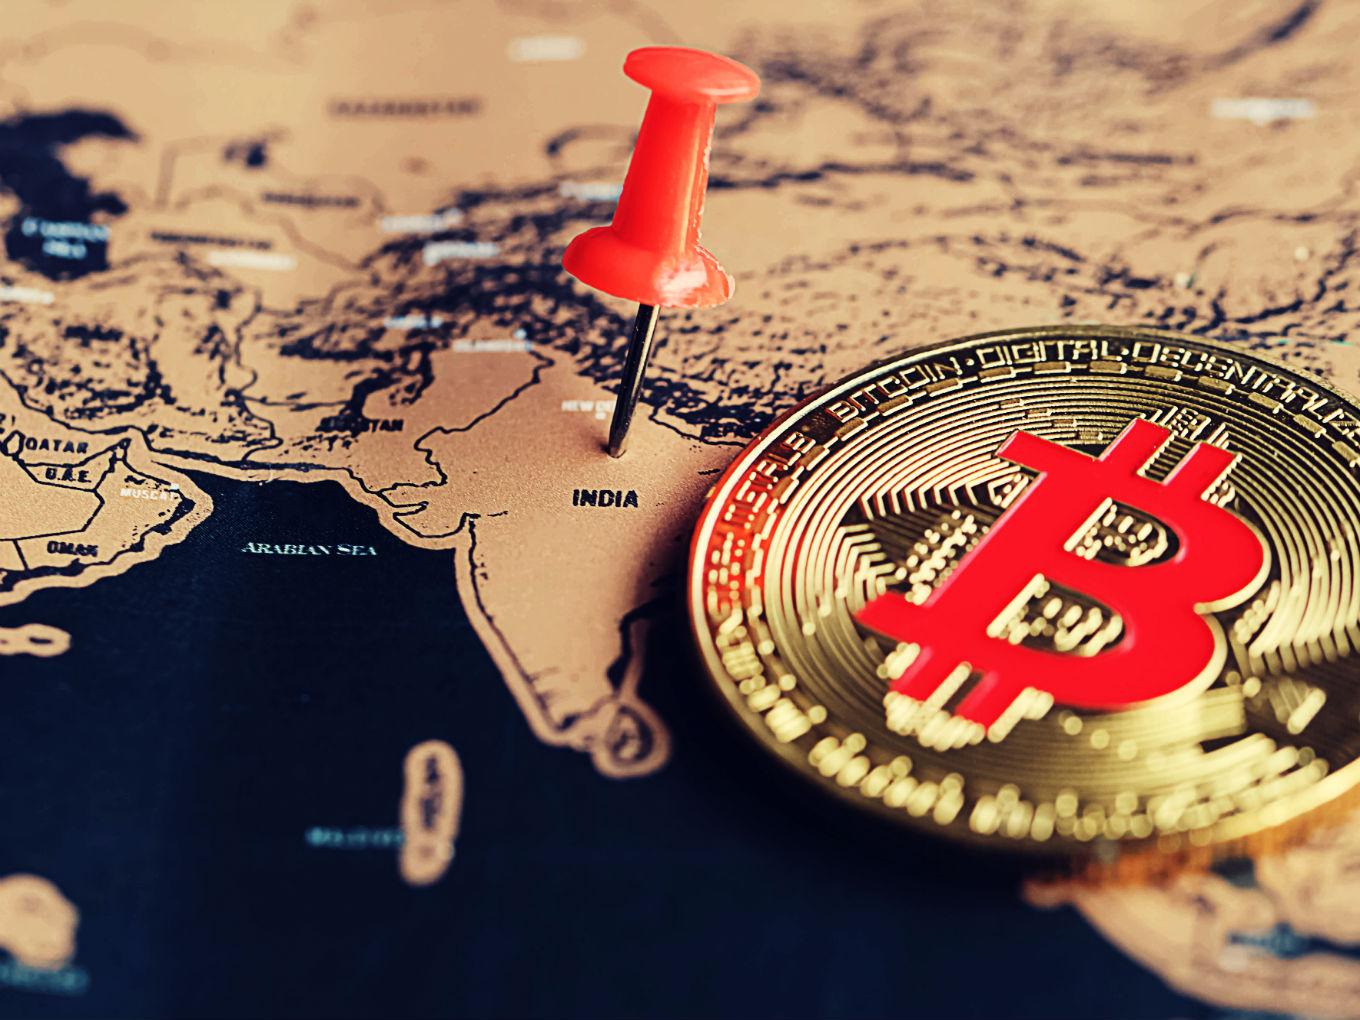 Can companies in India legally buy or trade in crypto currencies?